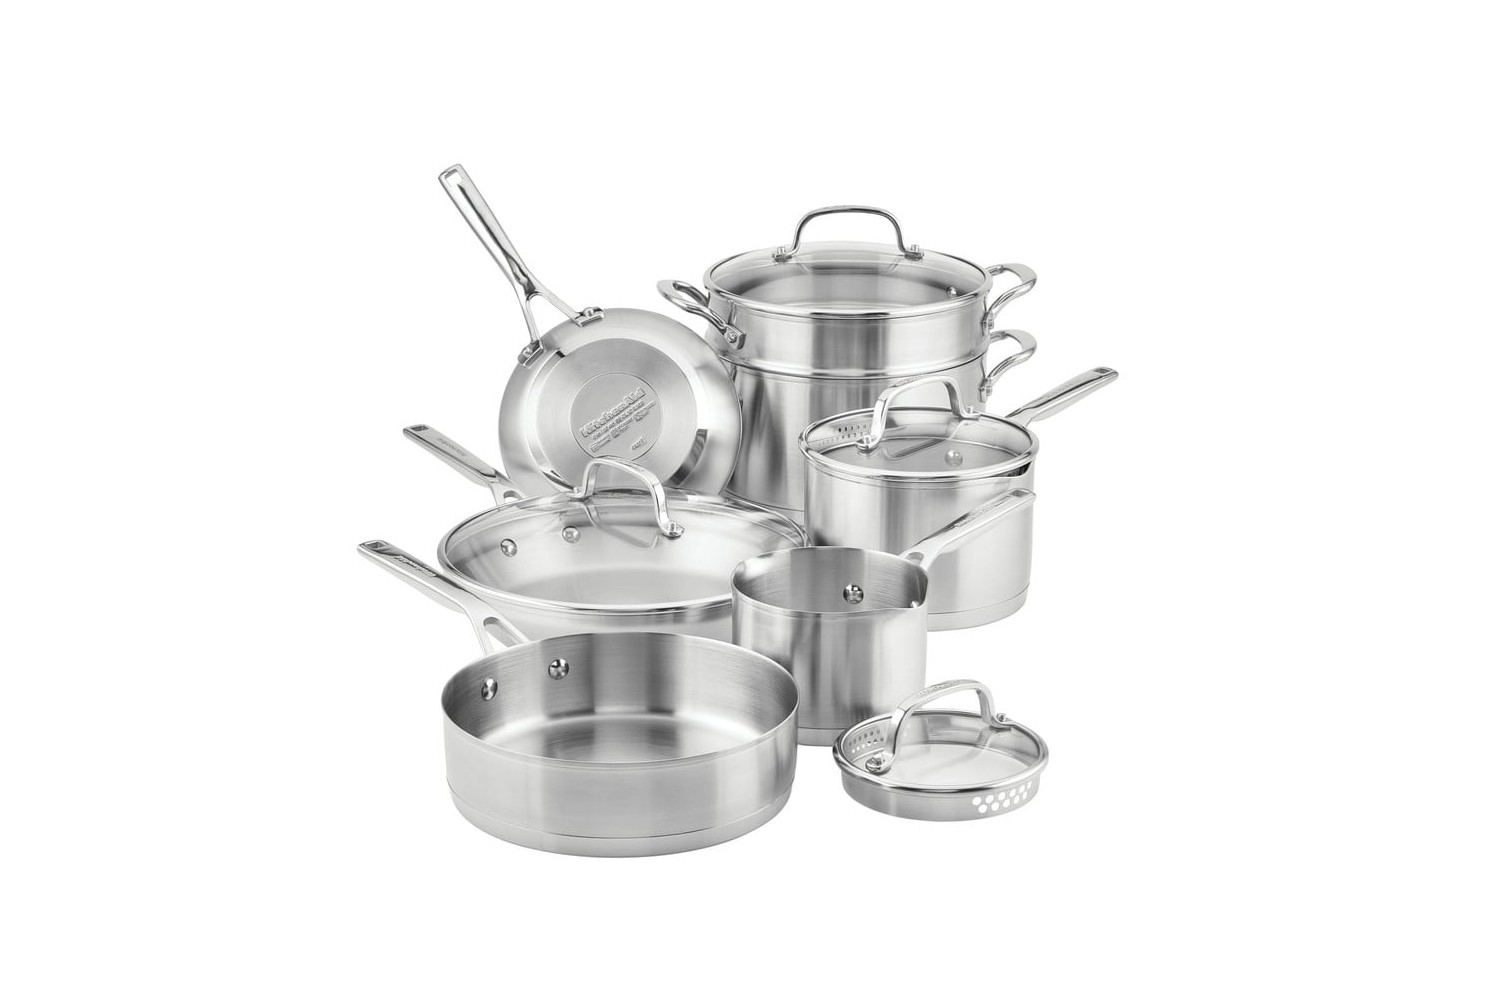 https://www.themanual.com/wp-content/uploads/sites/9/2022/01/best-stainless-steel-cookware-set-kitchenaid-3-ply-base-stainless-steel-11-piece-cookware-set.jpg?fit=800%2C800&p=1